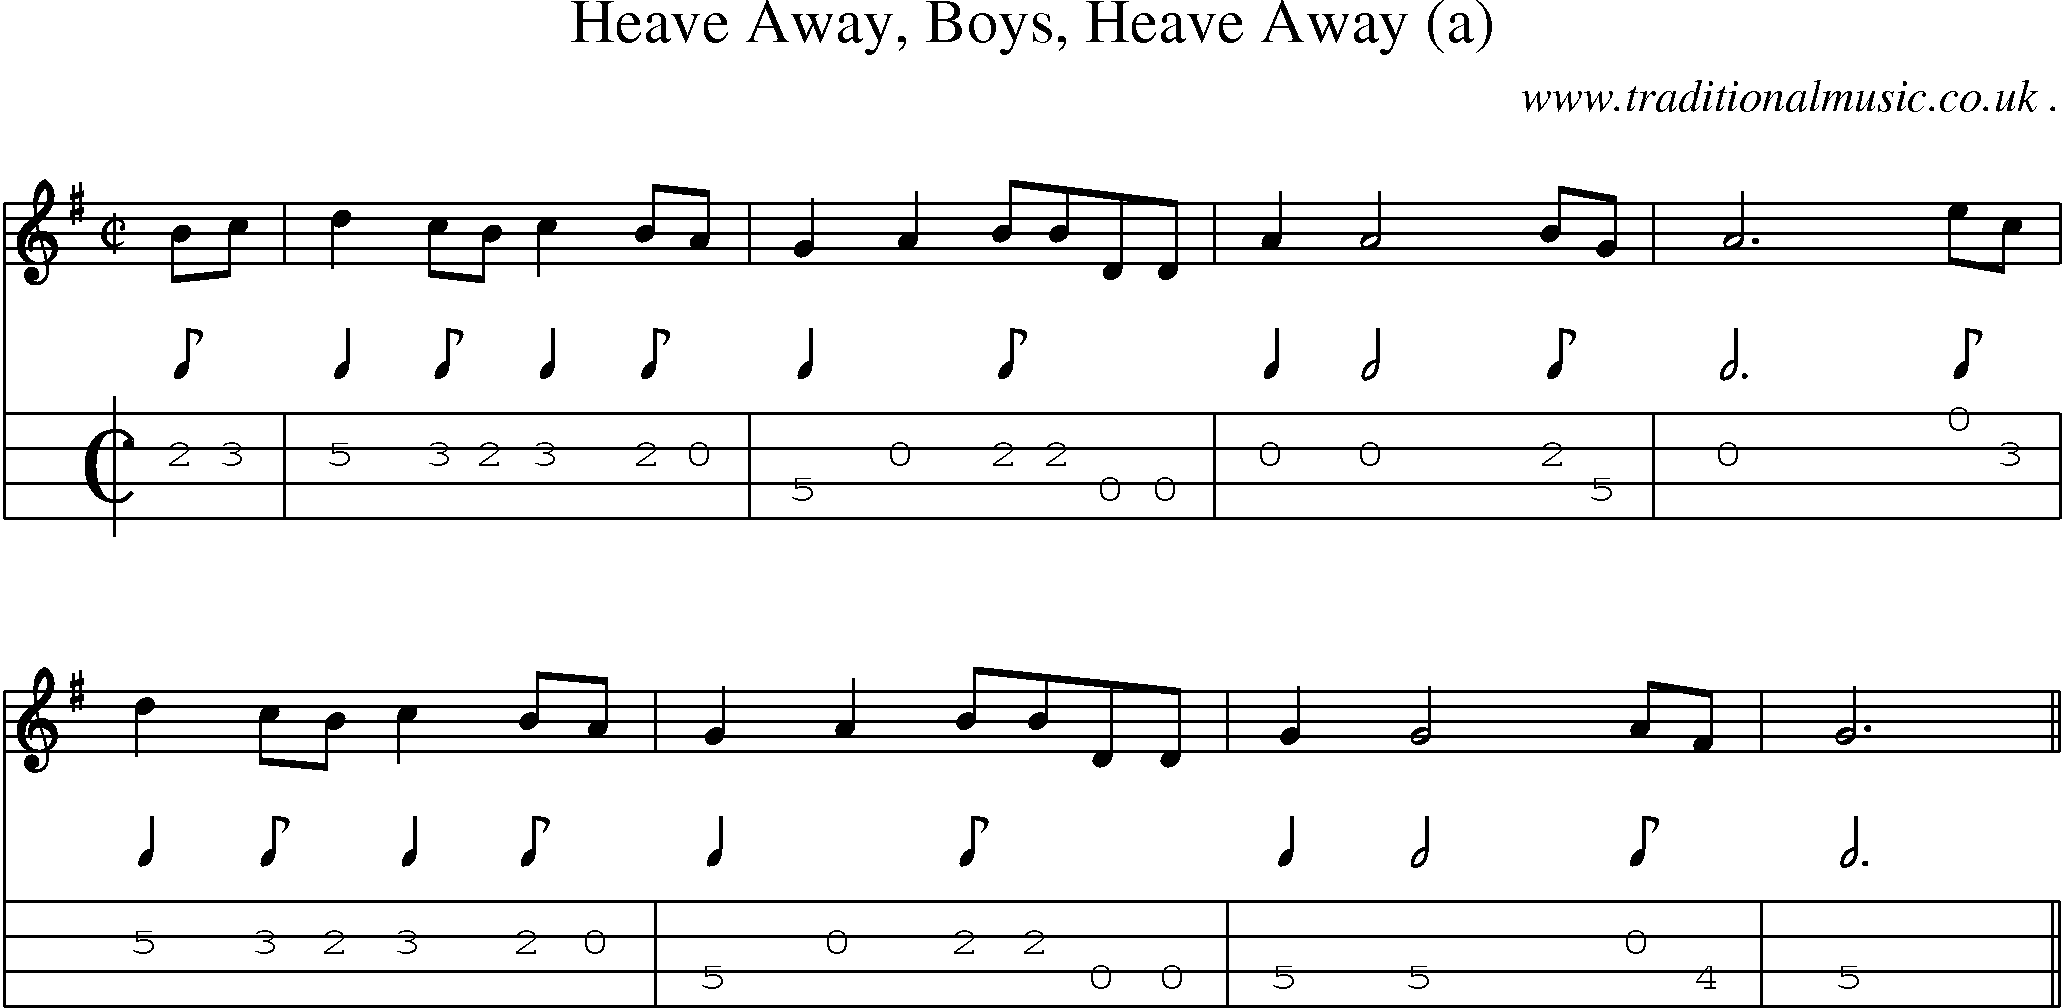 Sheet-Music and Mandolin Tabs for Heave Away Boys Heave Away (a)